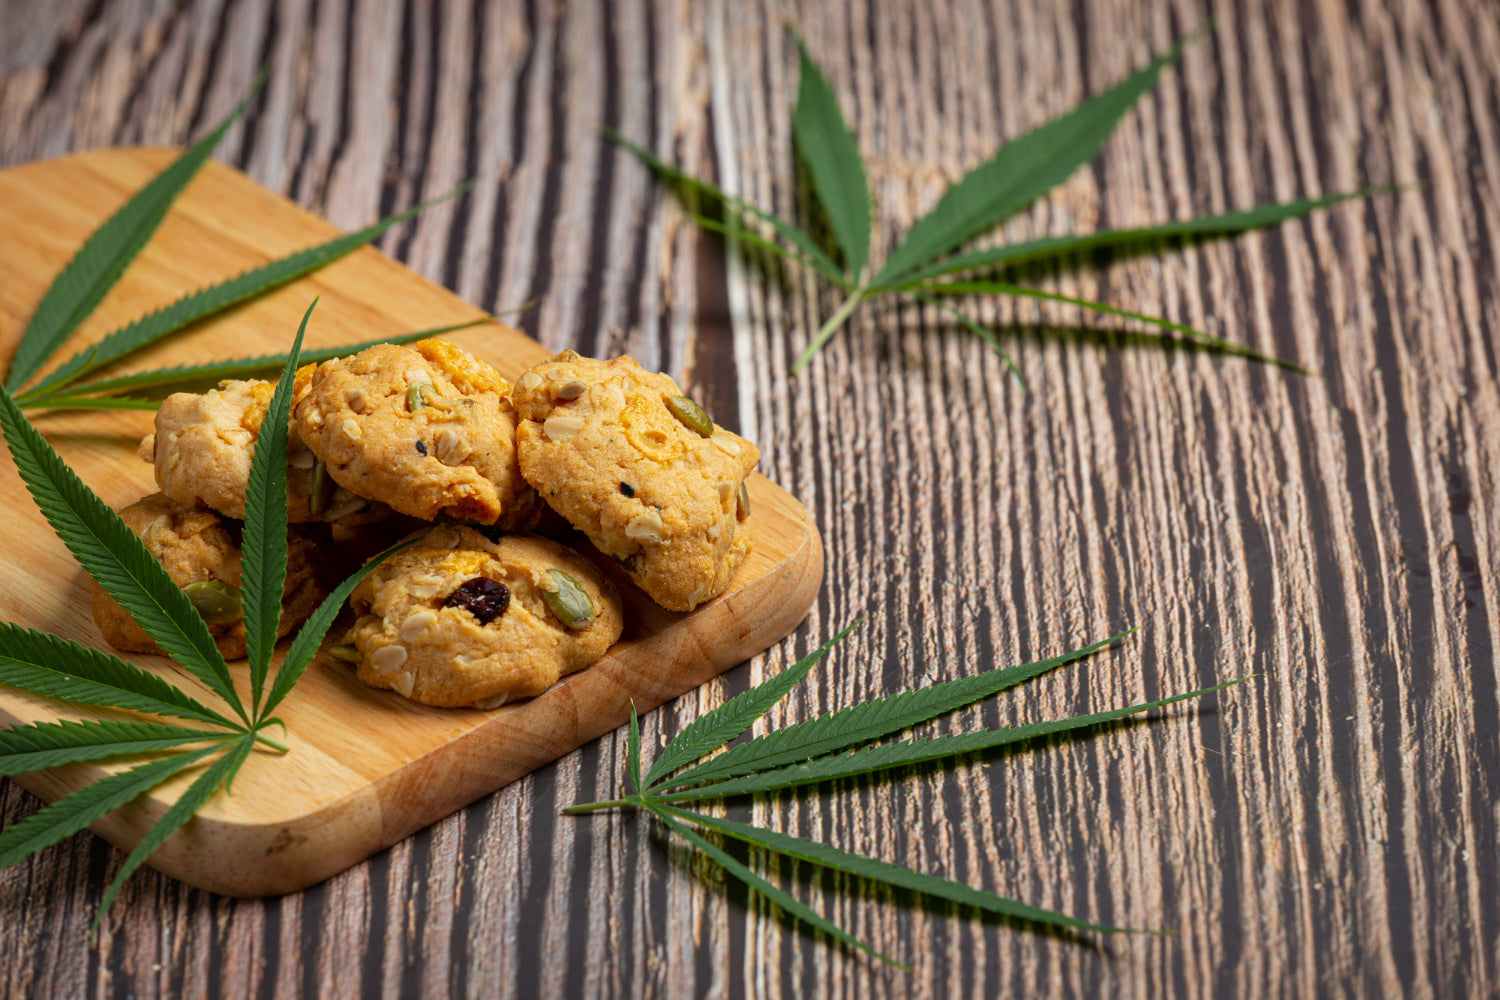 Gourmet or Ganja: The Diverse Uses of Mushrooms and Cannabis